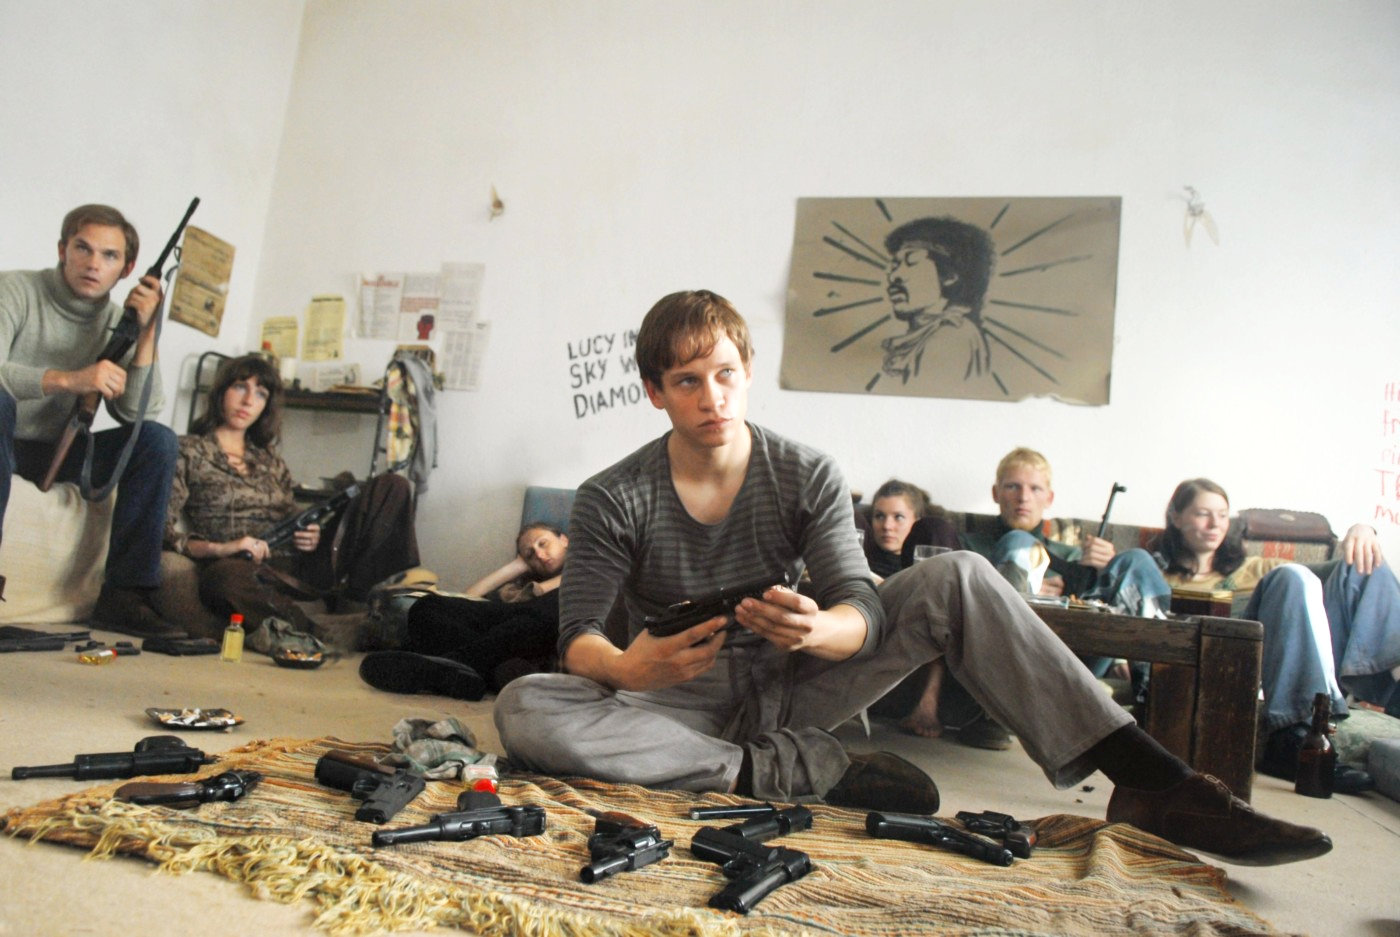 A scene from Vitagraph Films' The Baader Meinhof Complex (2009)